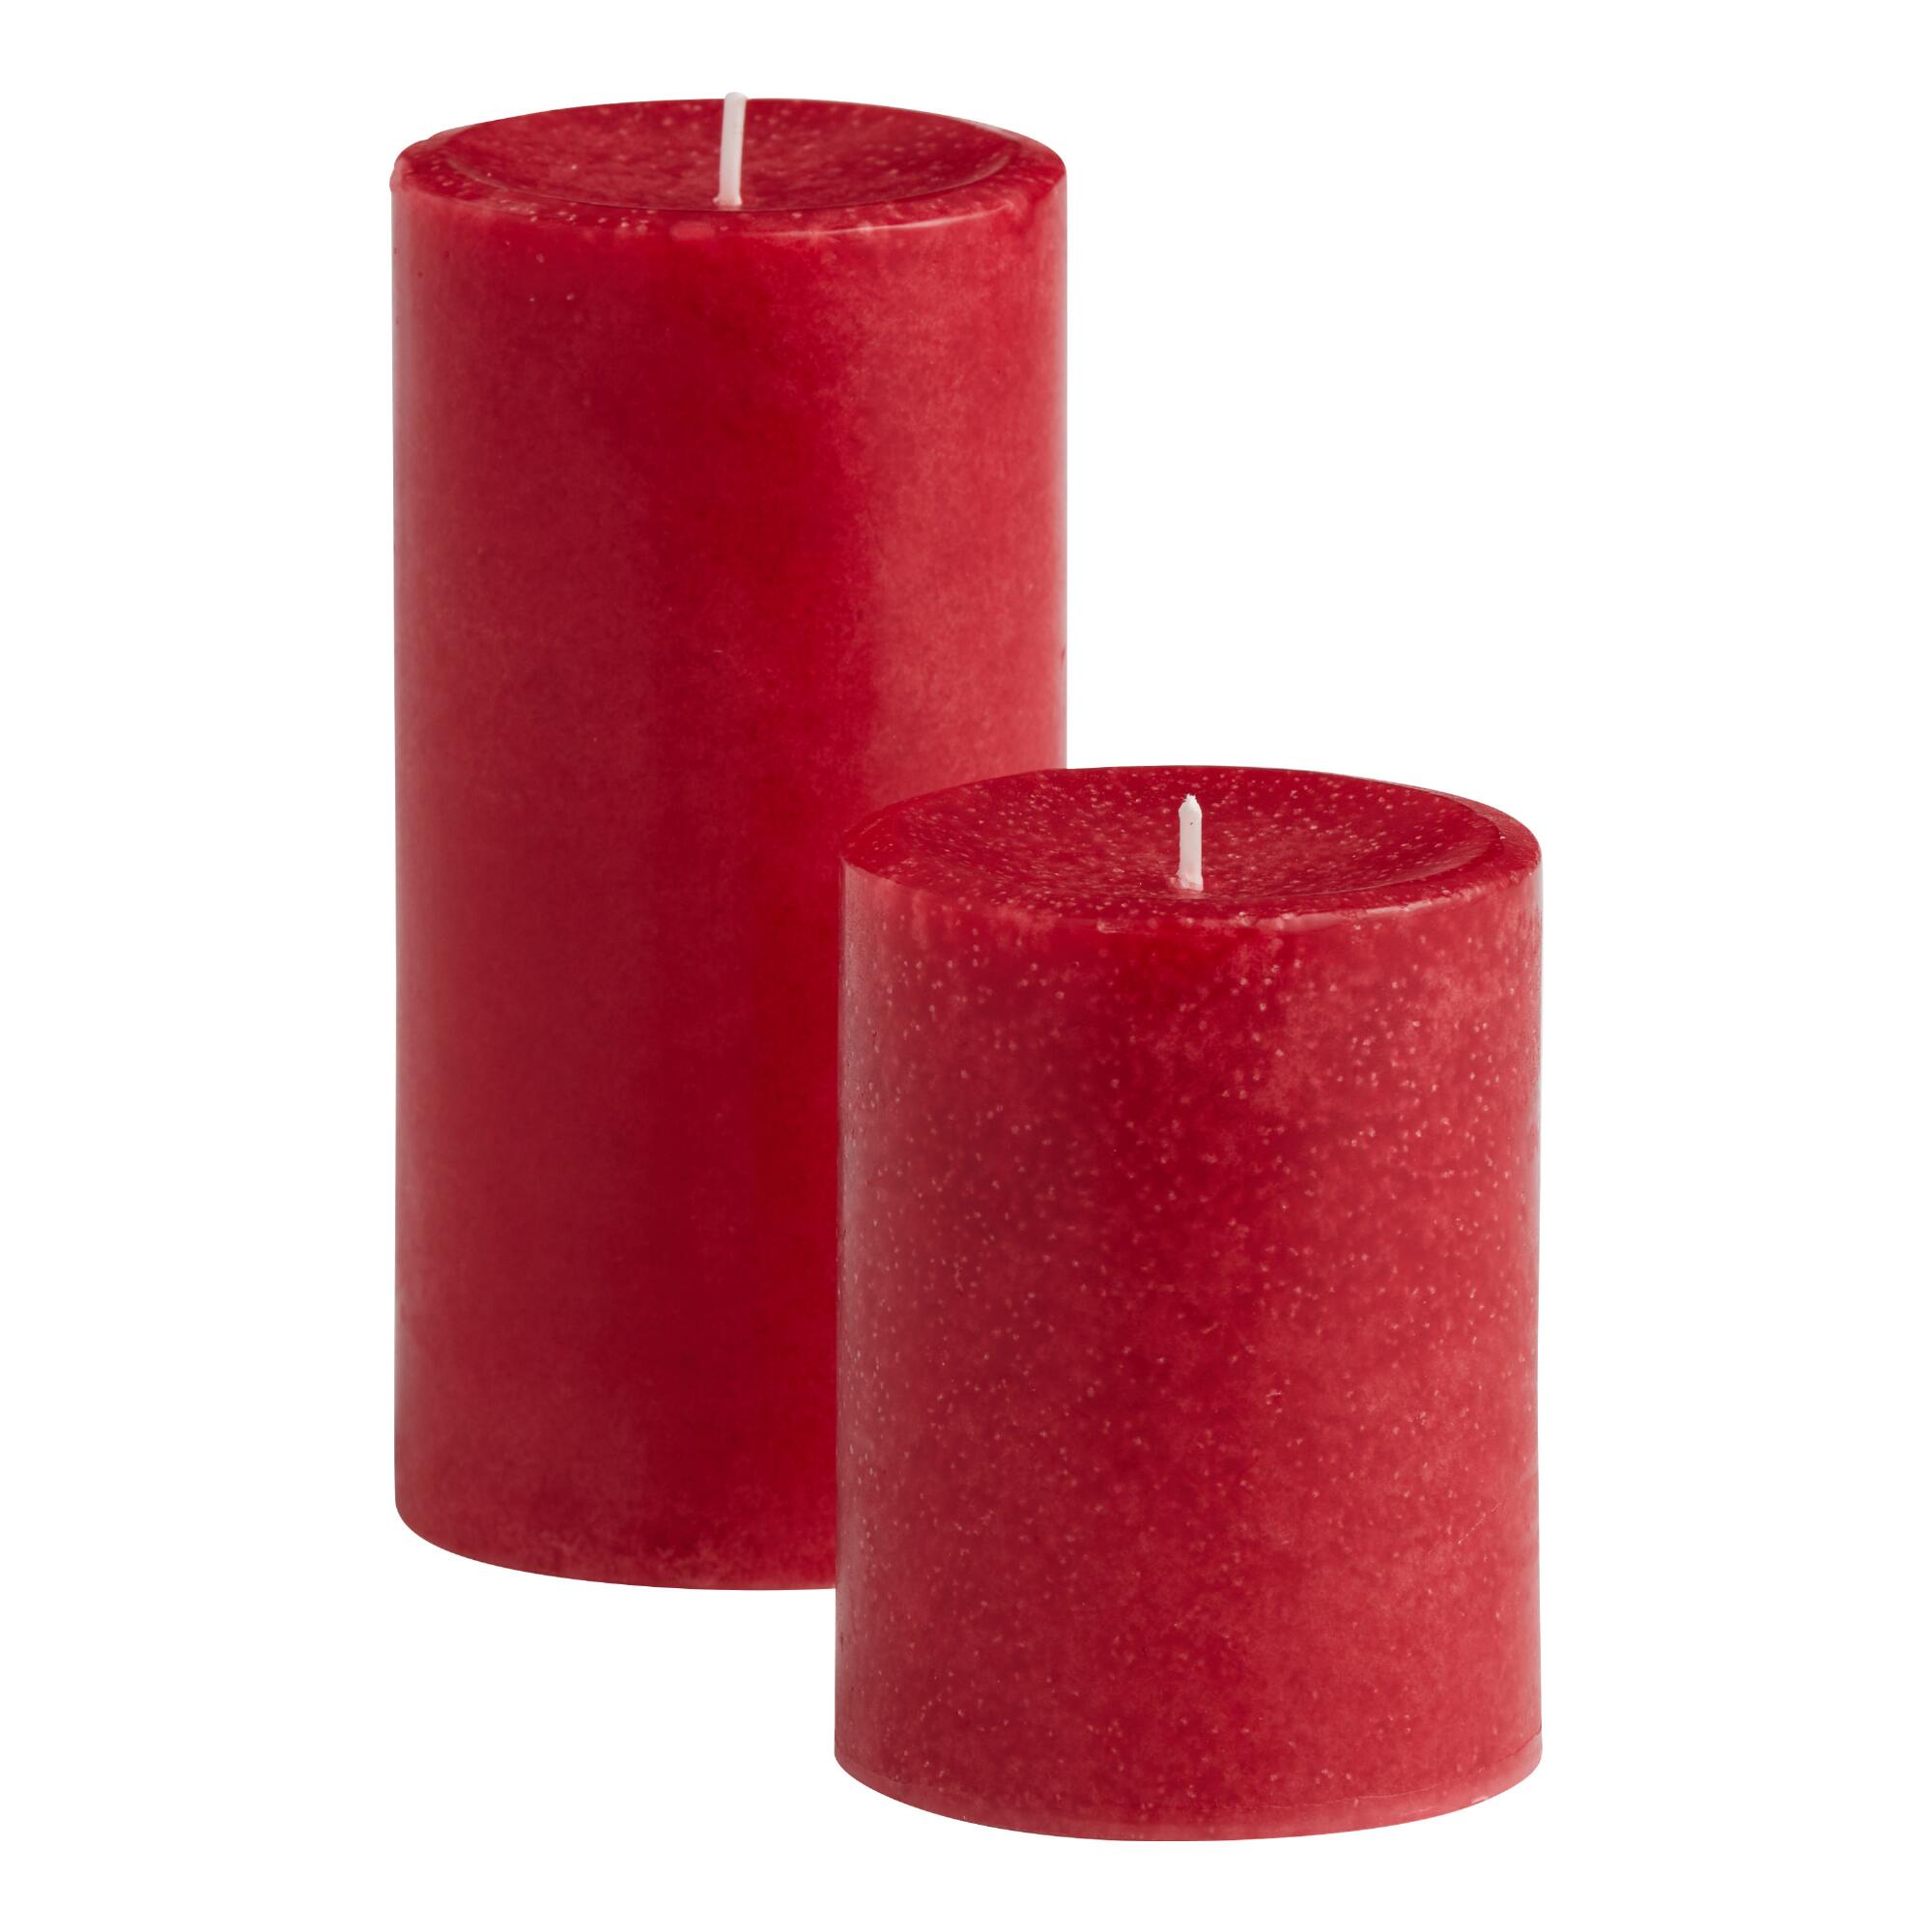 Pier Place Holiday Spice Pillar Scented Candle: Red - Scented Wax by World Market